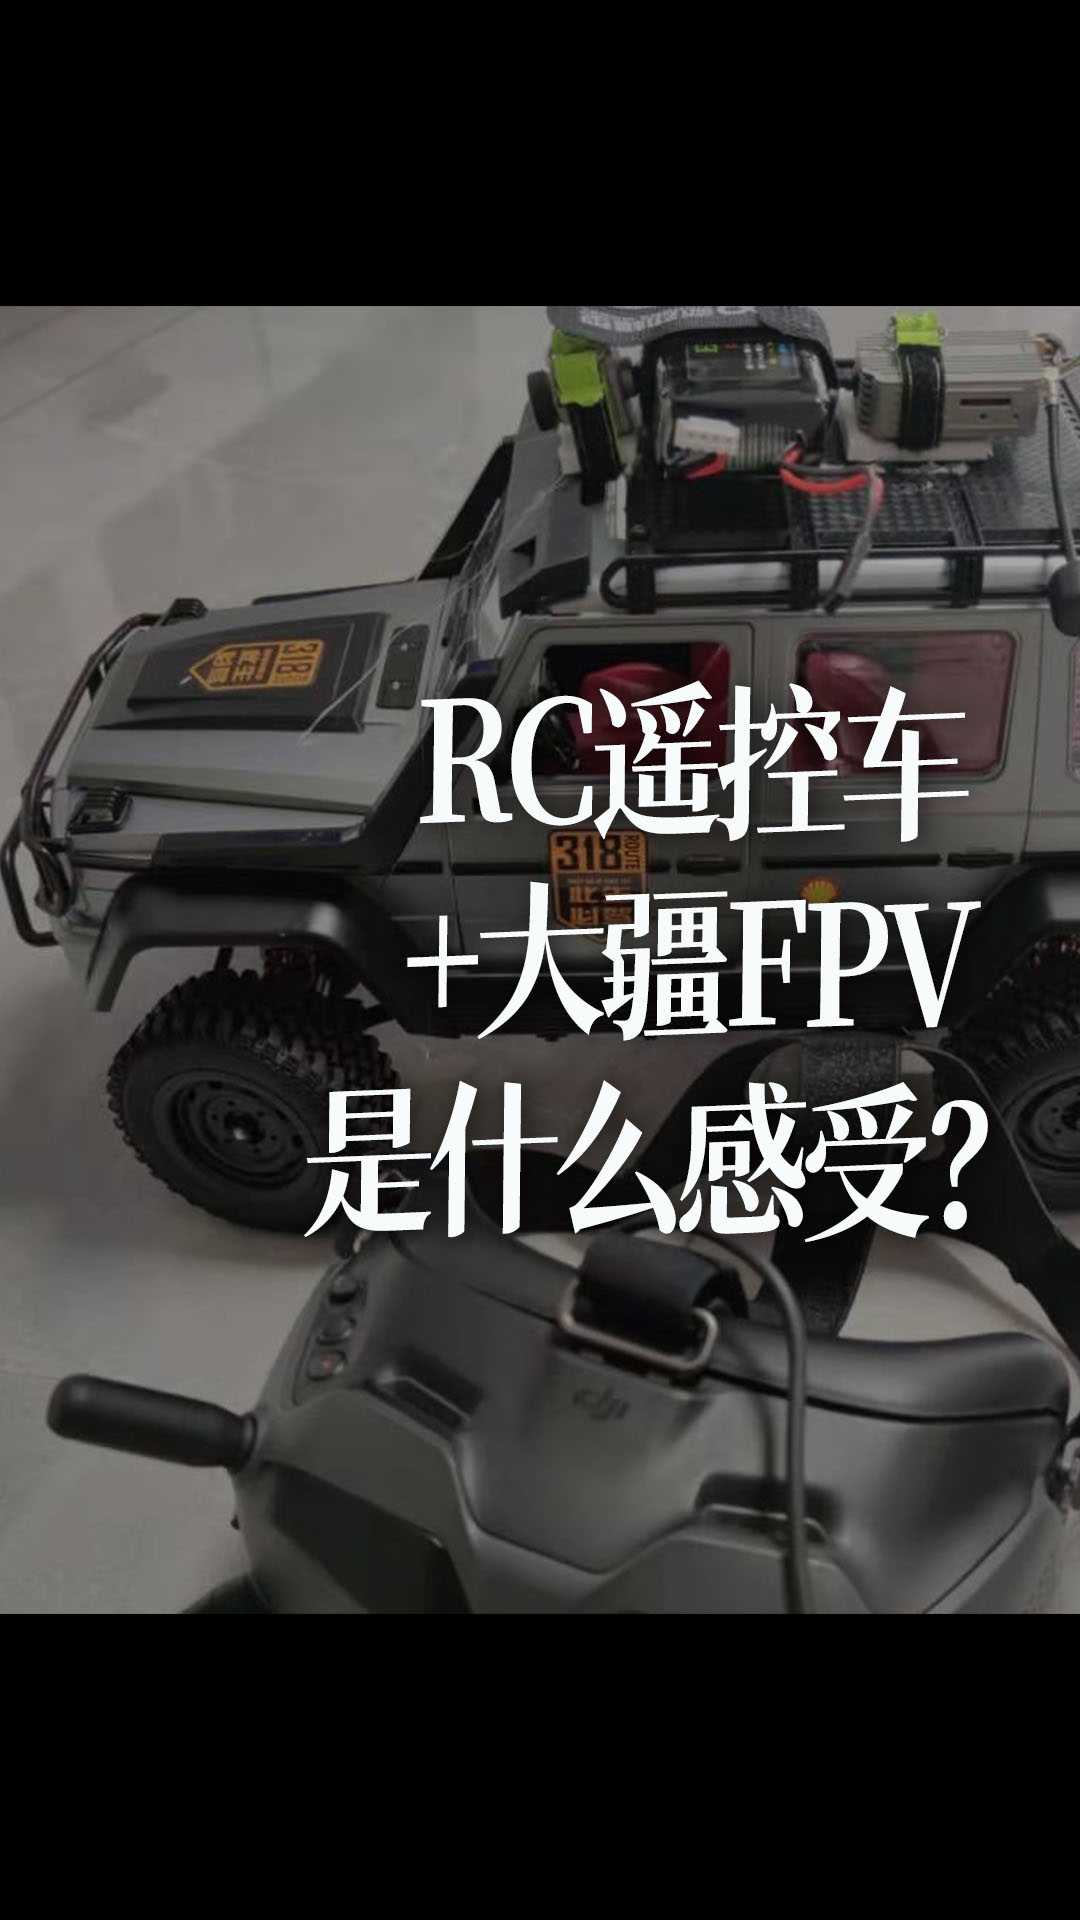 RC?？爻?大疆FPV是什么感受？